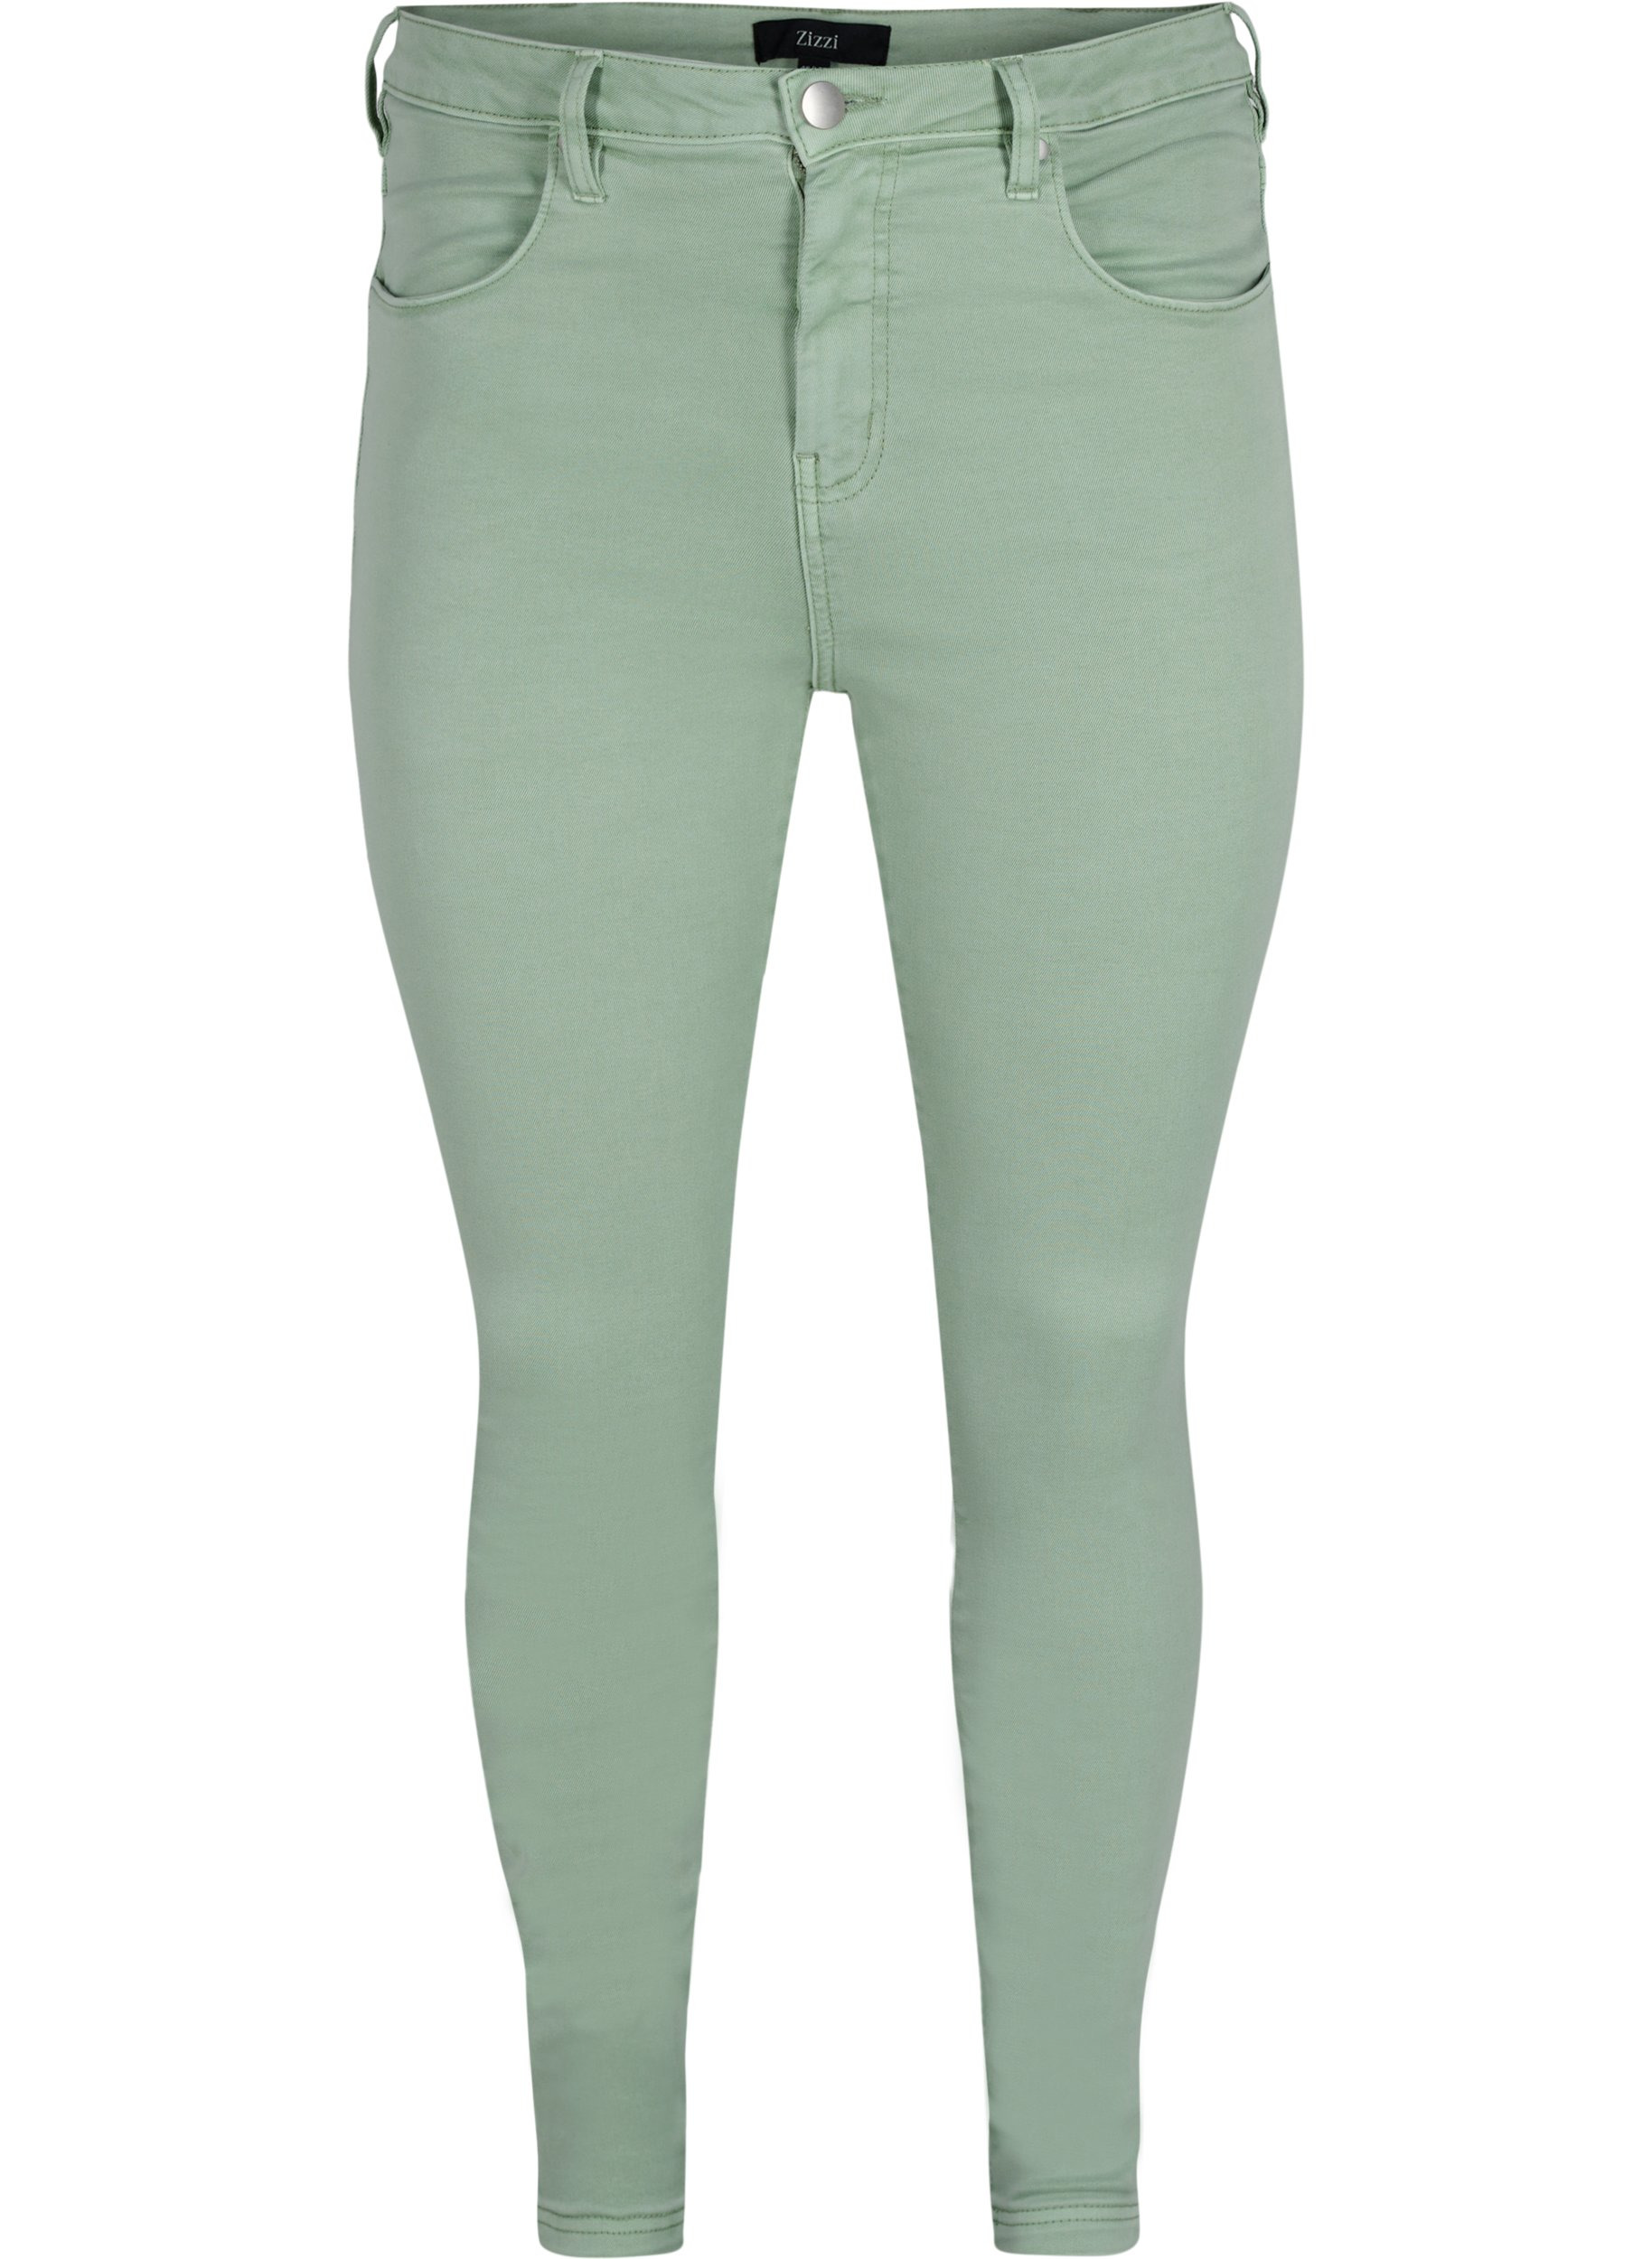 Super Slim Amy Jeans mit hoher Taille, Frosty Green